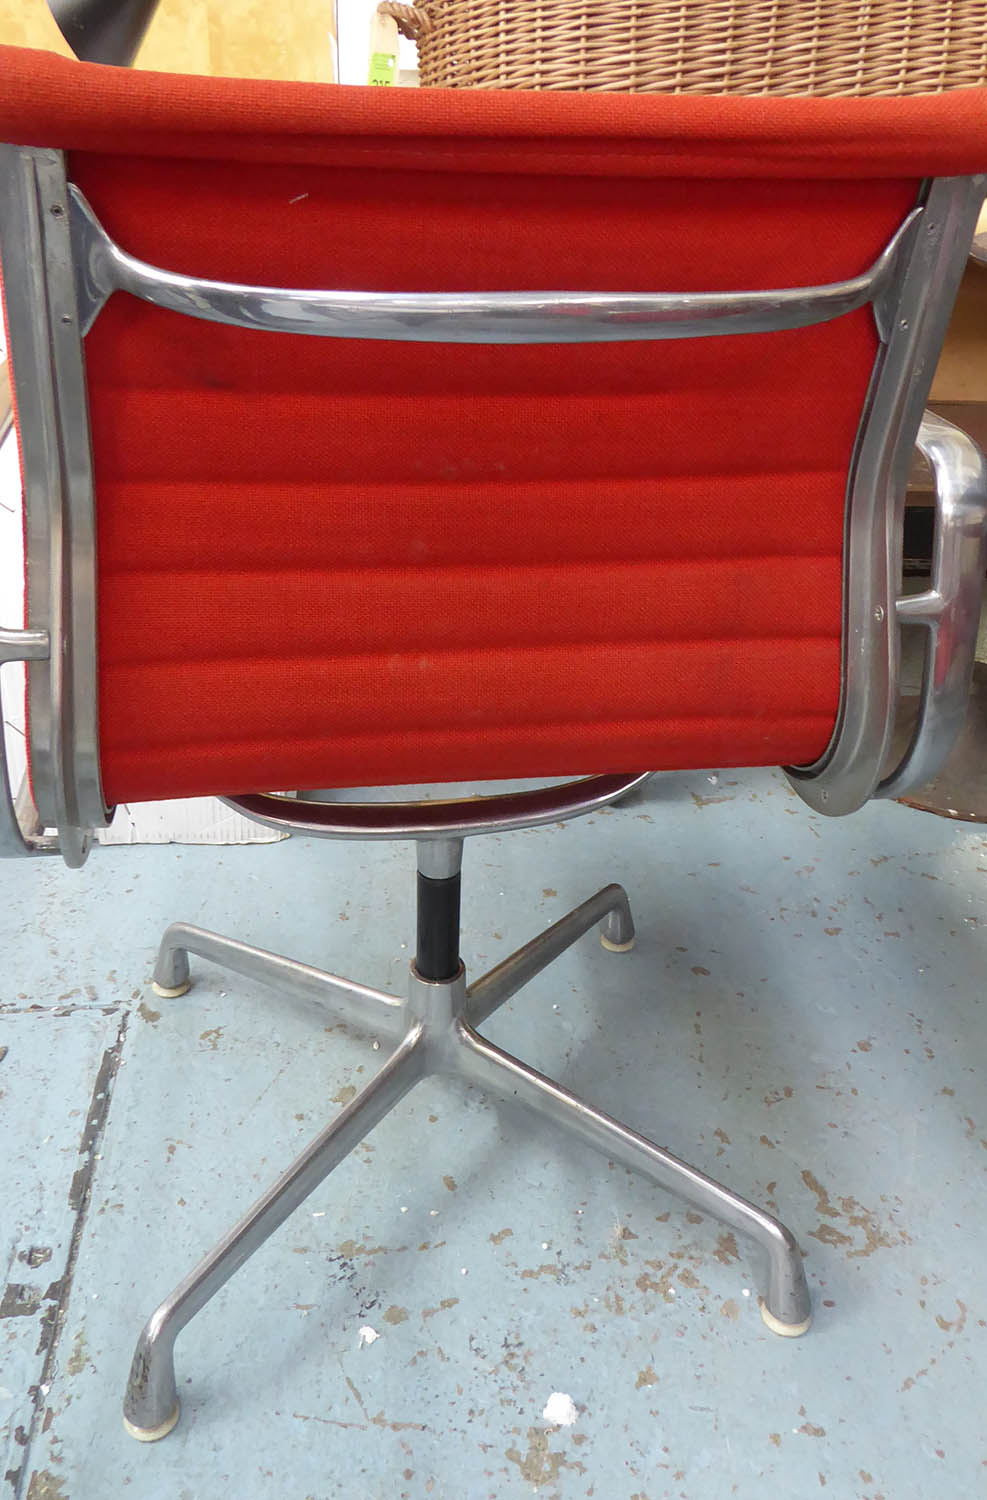 HERMAN MILLER ALUMINIUM GROUP CHAIR BY CHARLES AND RAY EAMES, 83cm H. - Image 5 of 8